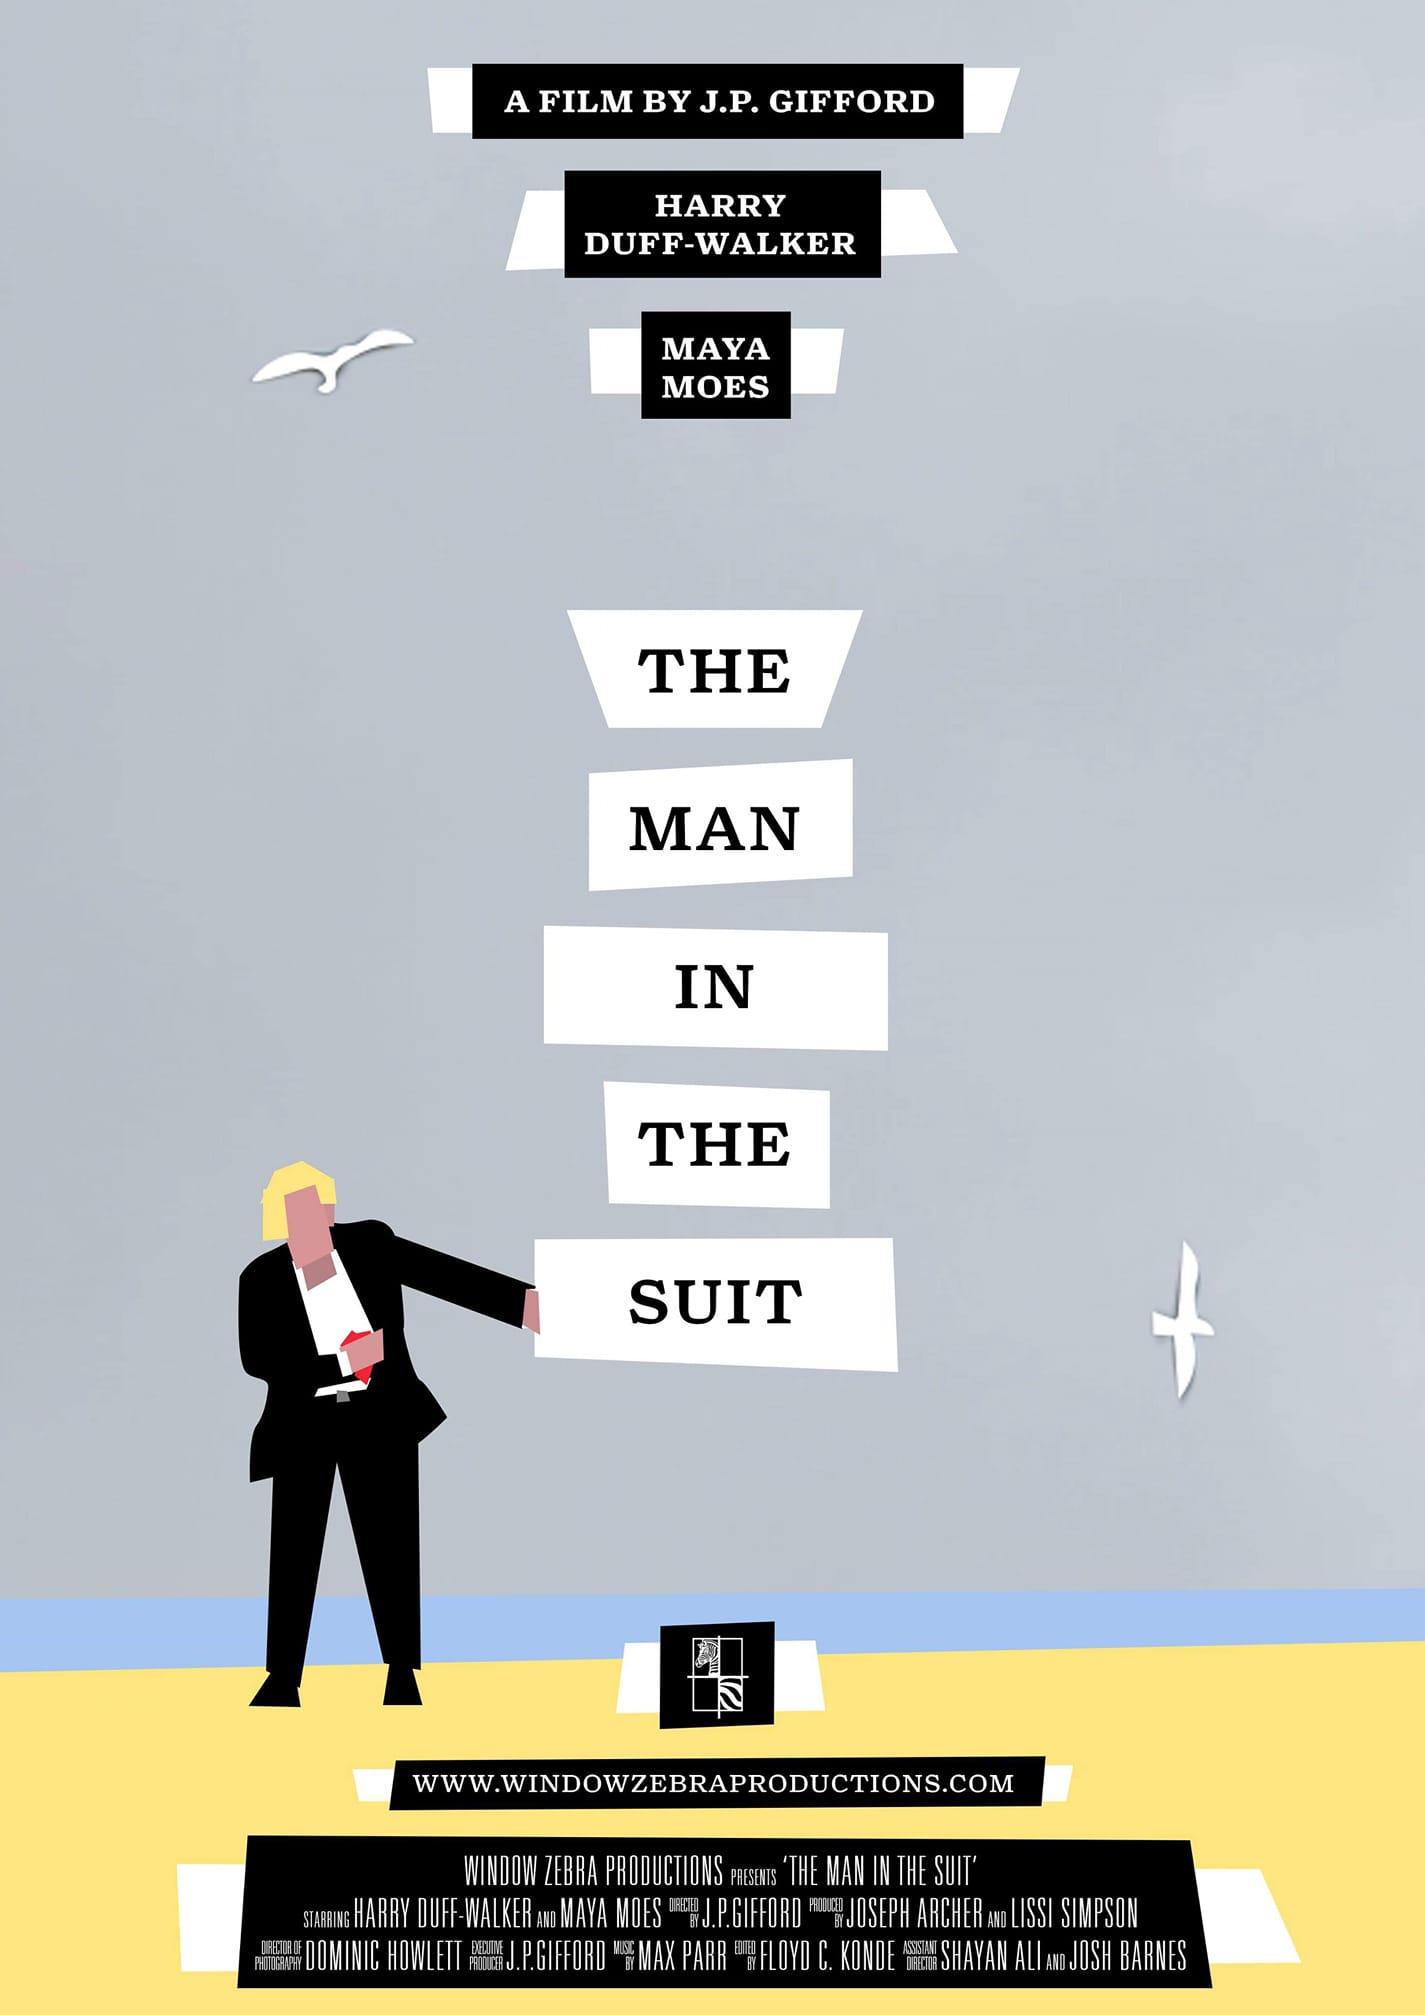 ‘THE MAN IN THE SUIT’ teaser trailer is out!